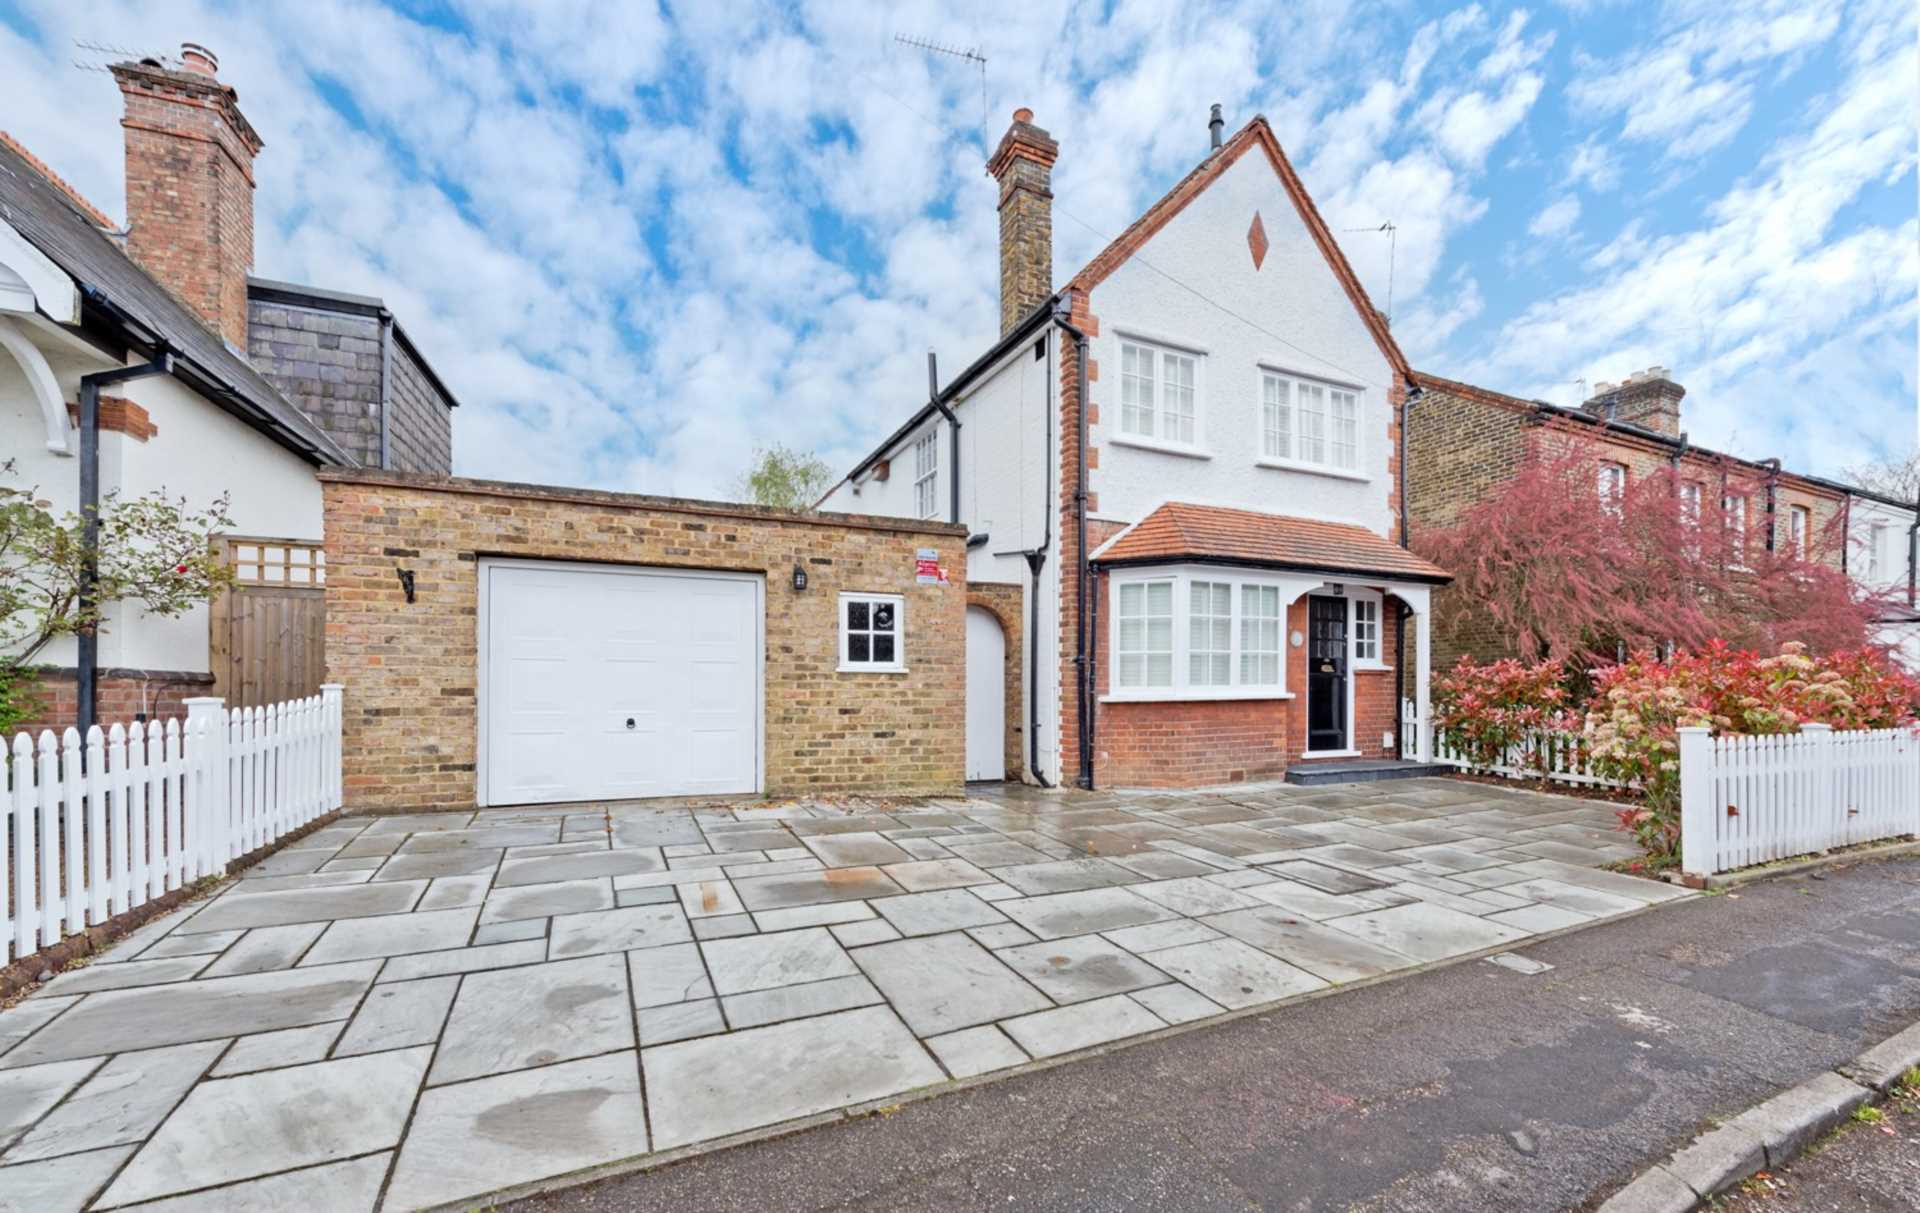 Thorkhill Road, Thames Ditton, Image 1